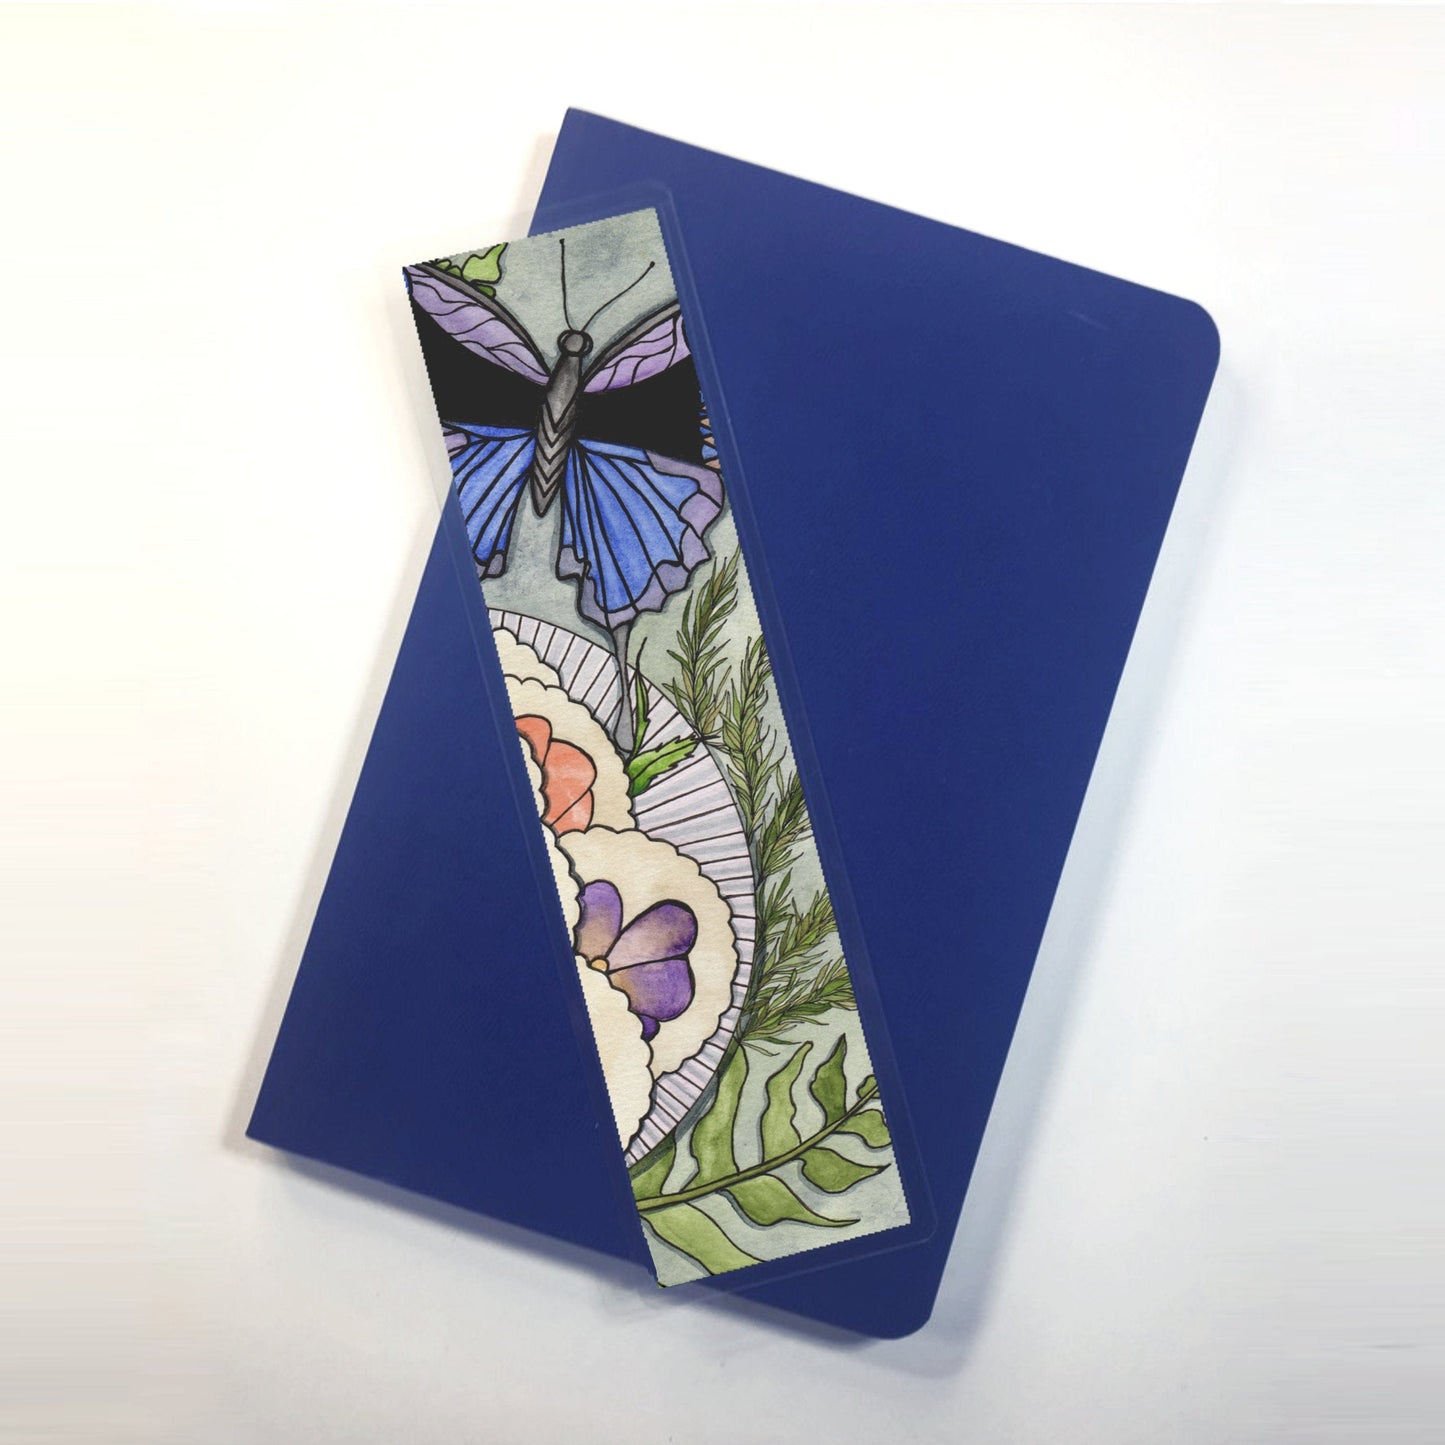 PinkPolish Design Bookmarks "Pansy Shortbread" 2-Sided Bookmark